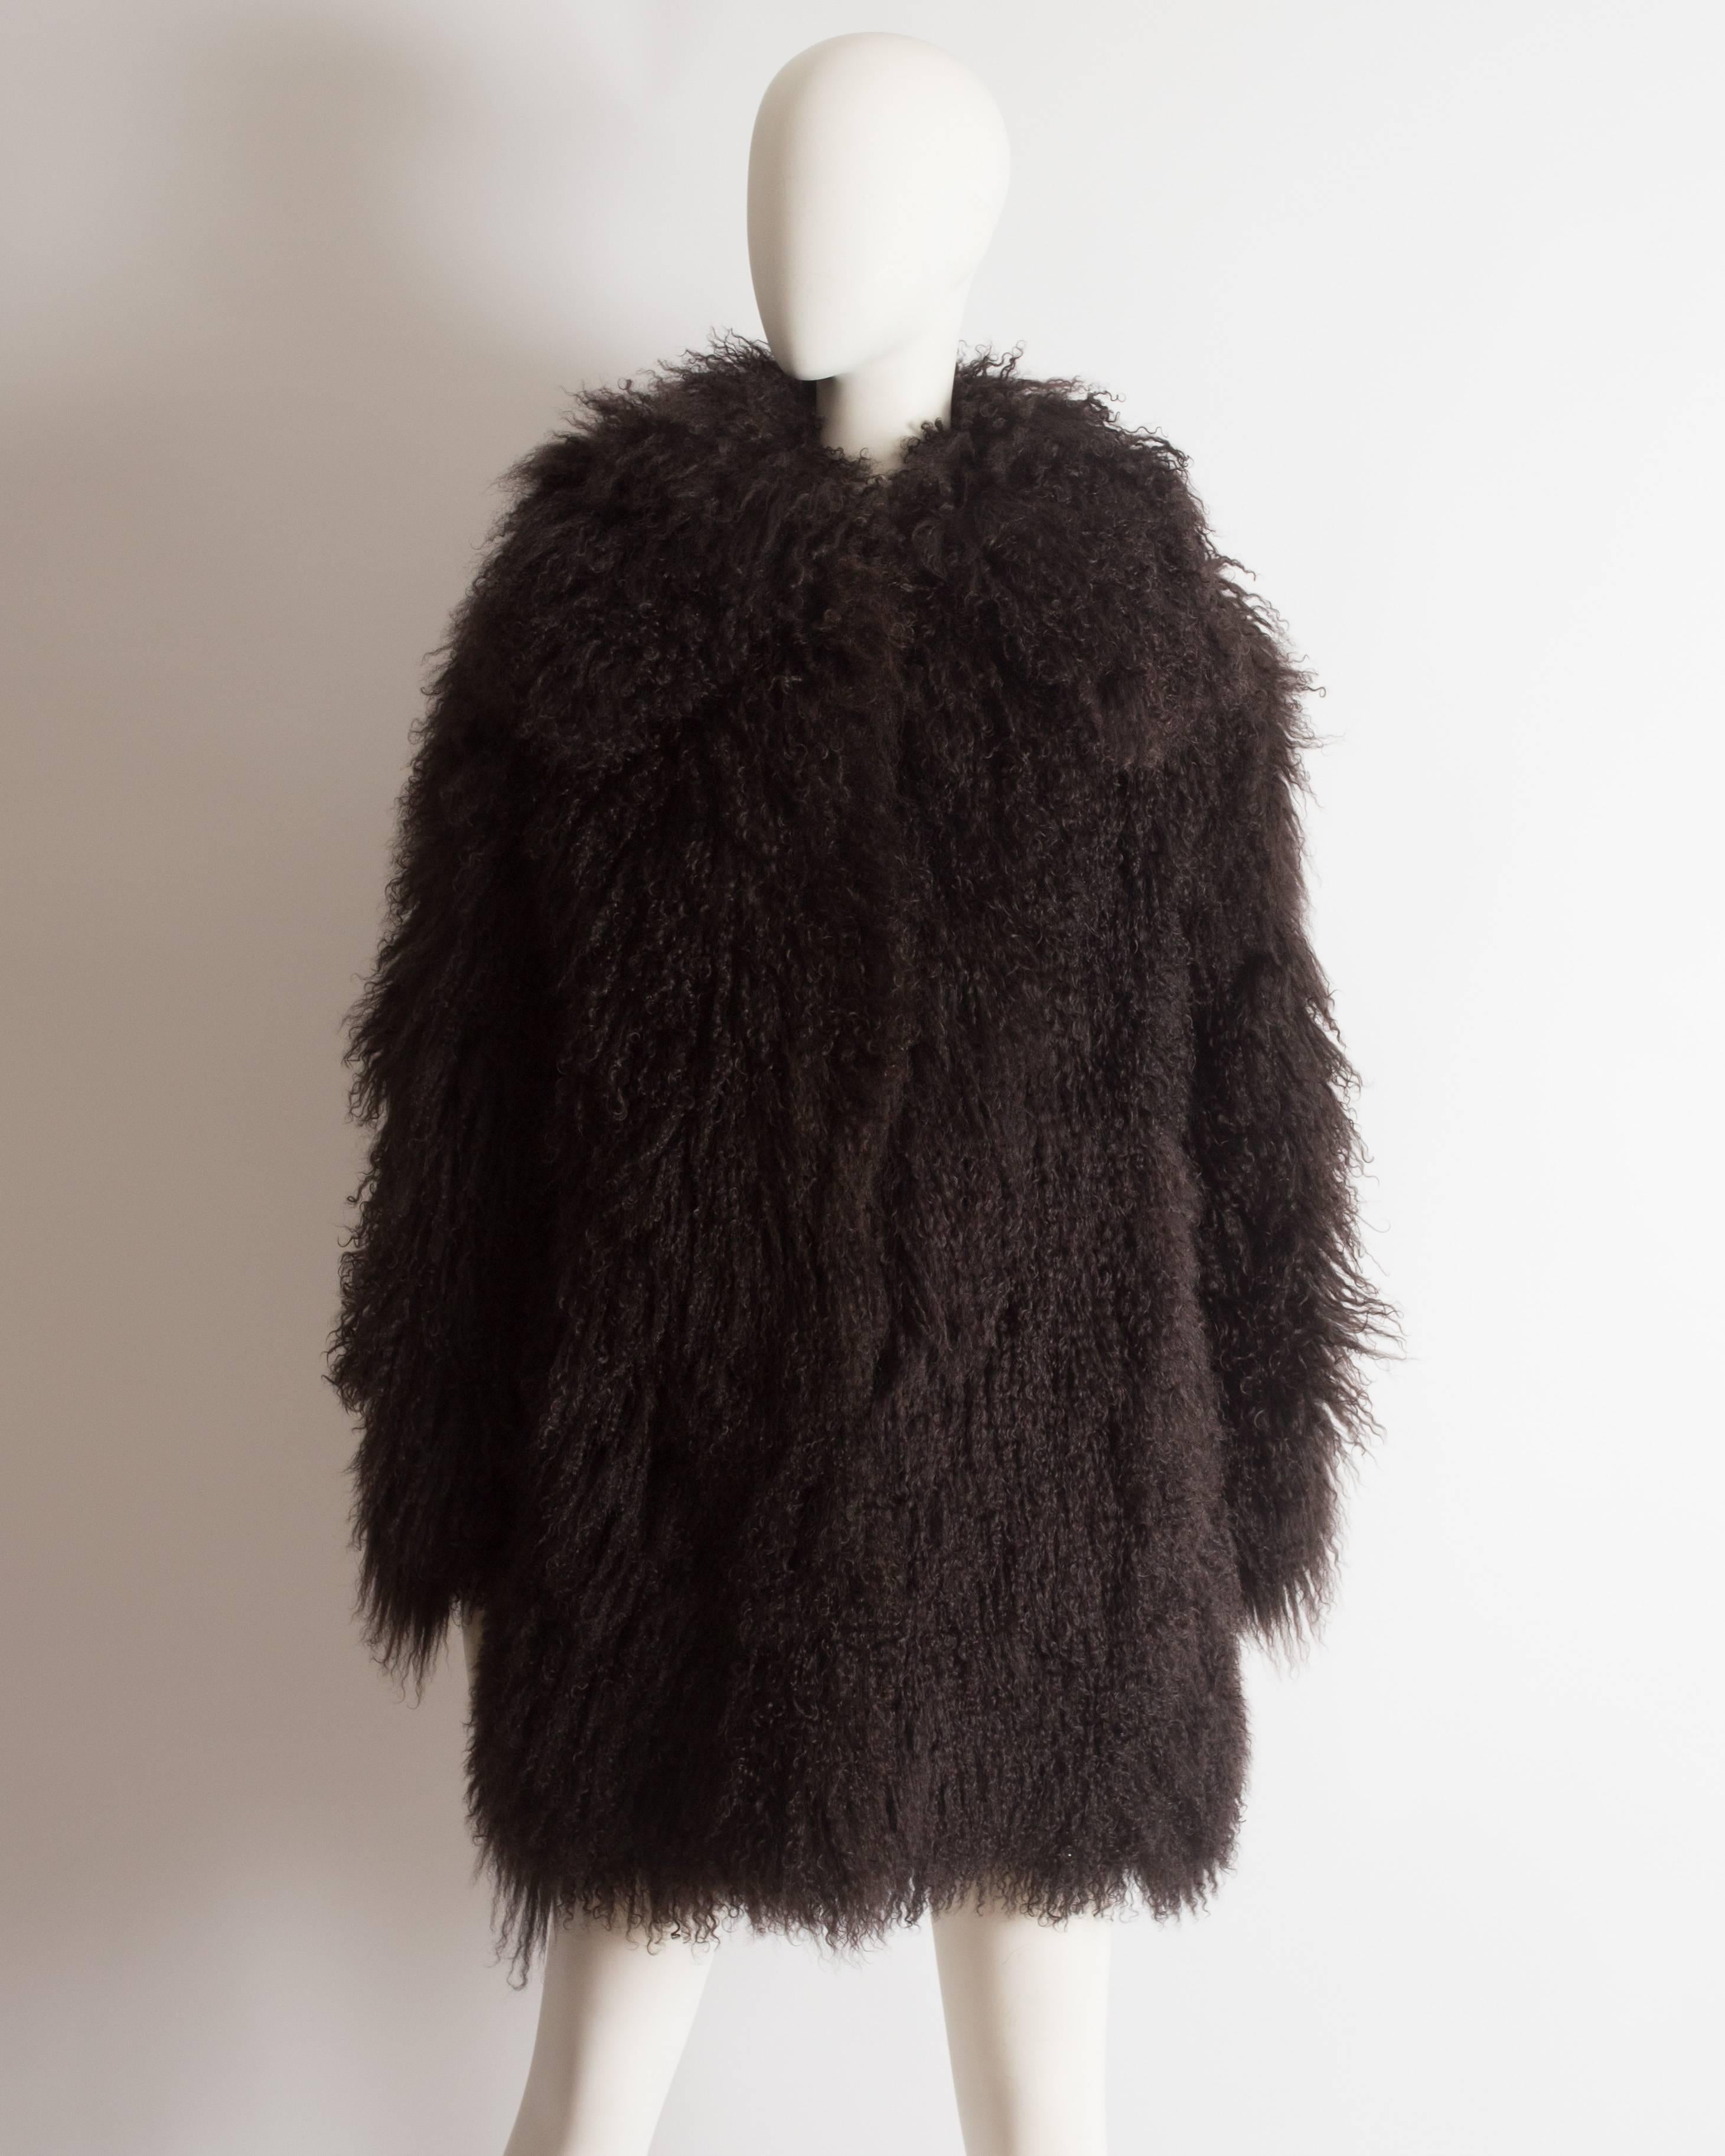 Alaia Mongolian lamb coat with oversized collar, hook-and-eye fastenings, and two front pockets. 
